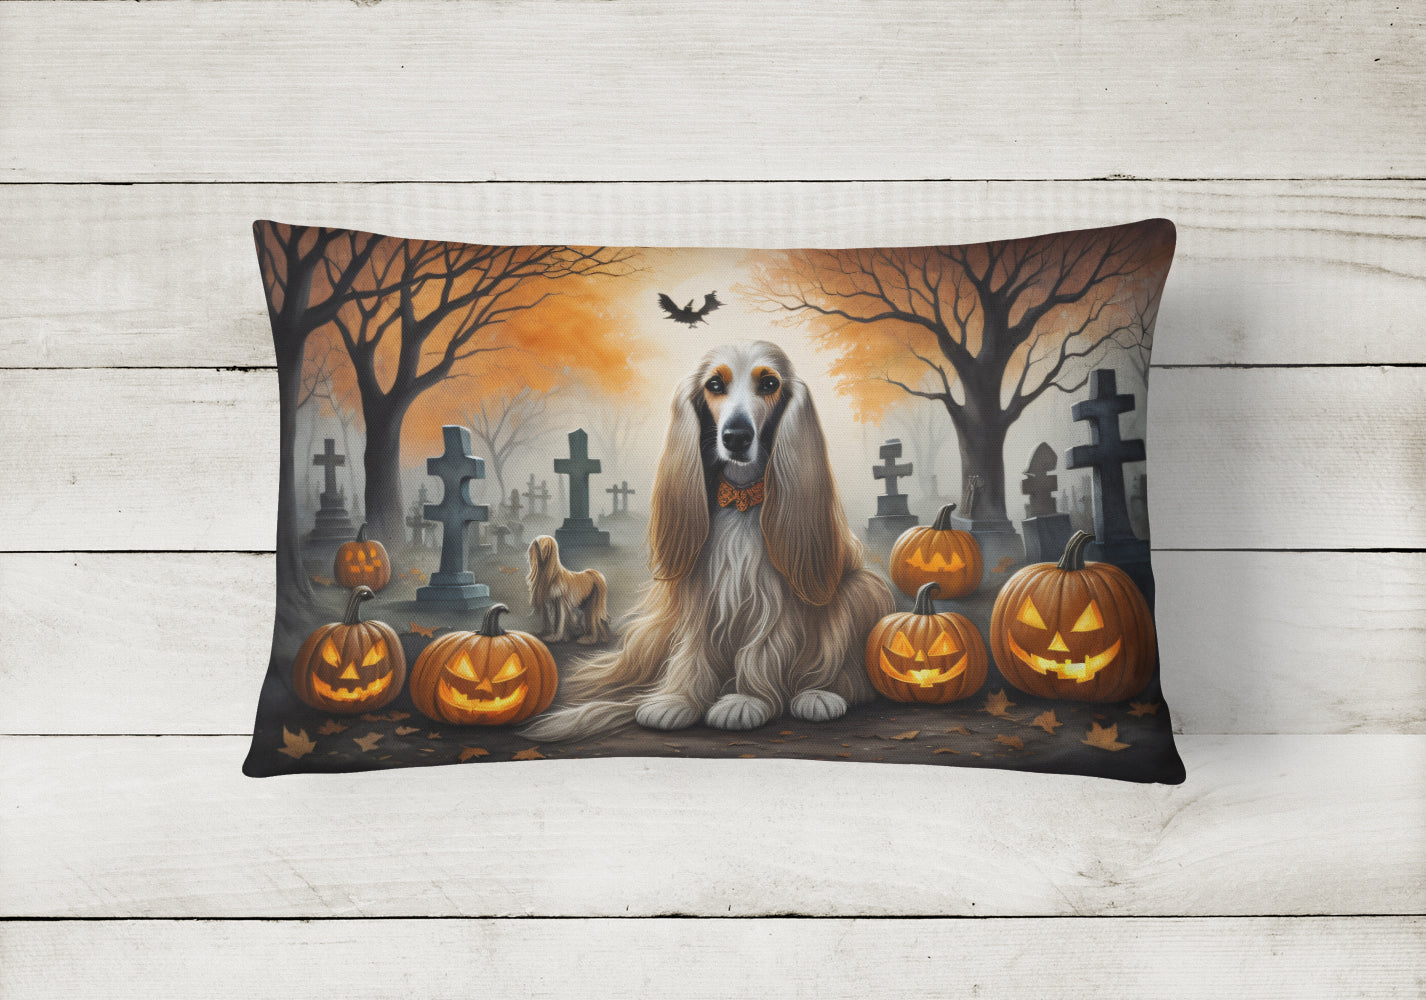 Buy this Afghan Hound Spooky Halloween Fabric Decorative Pillow